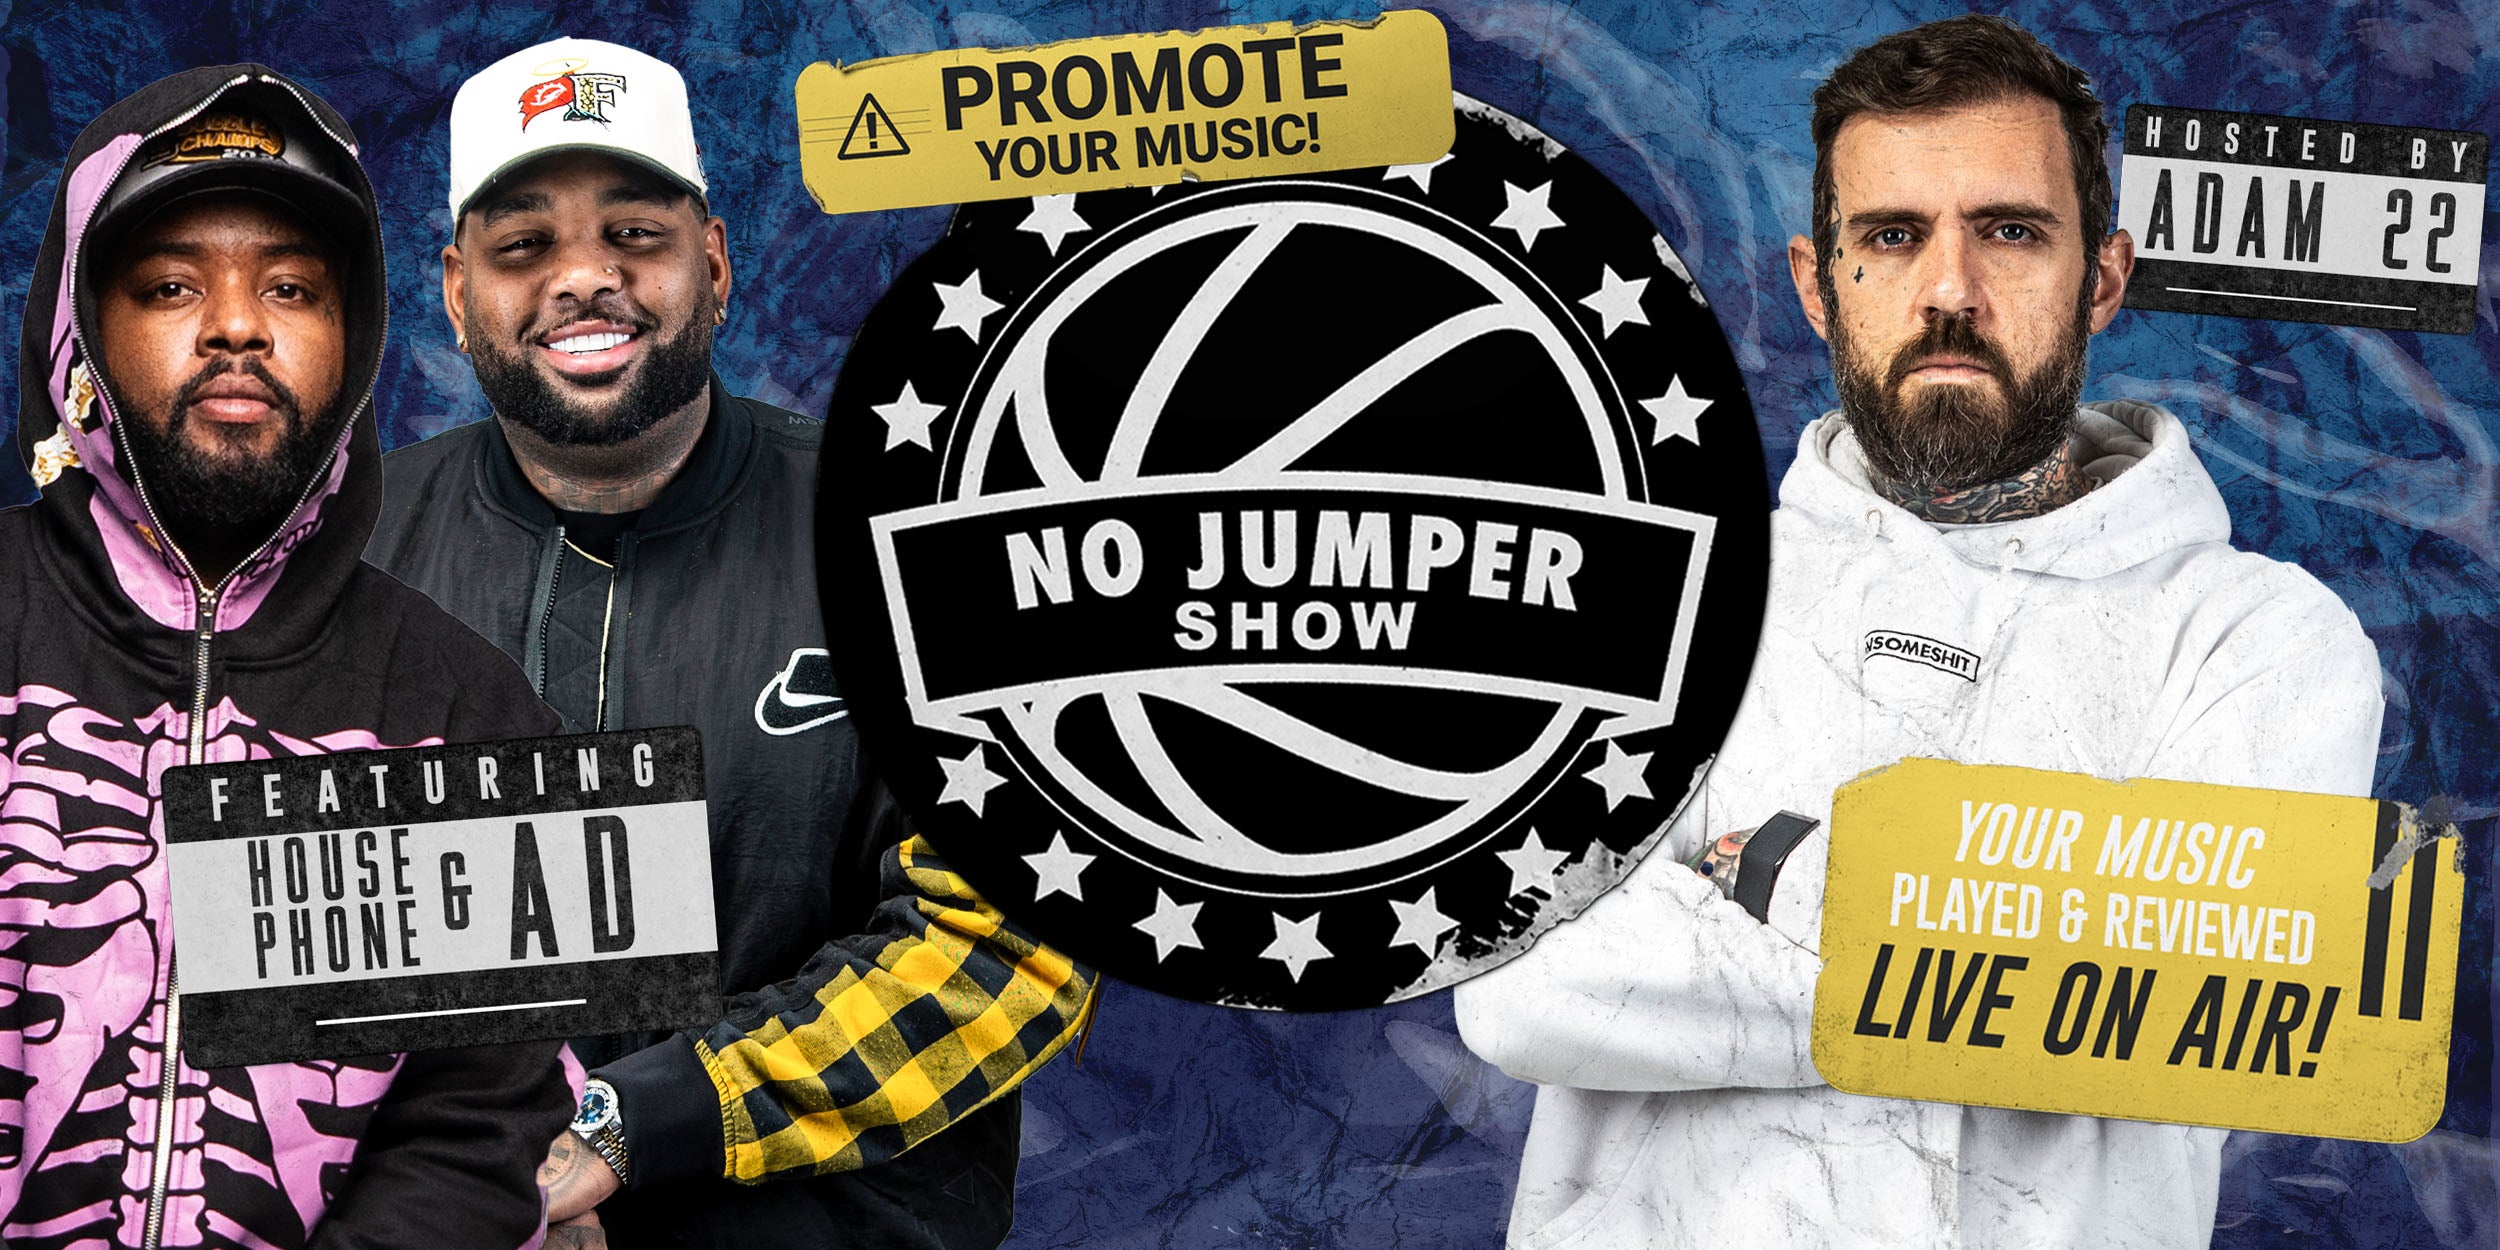 Promote Your Music Through No Jumper Nojumperstore